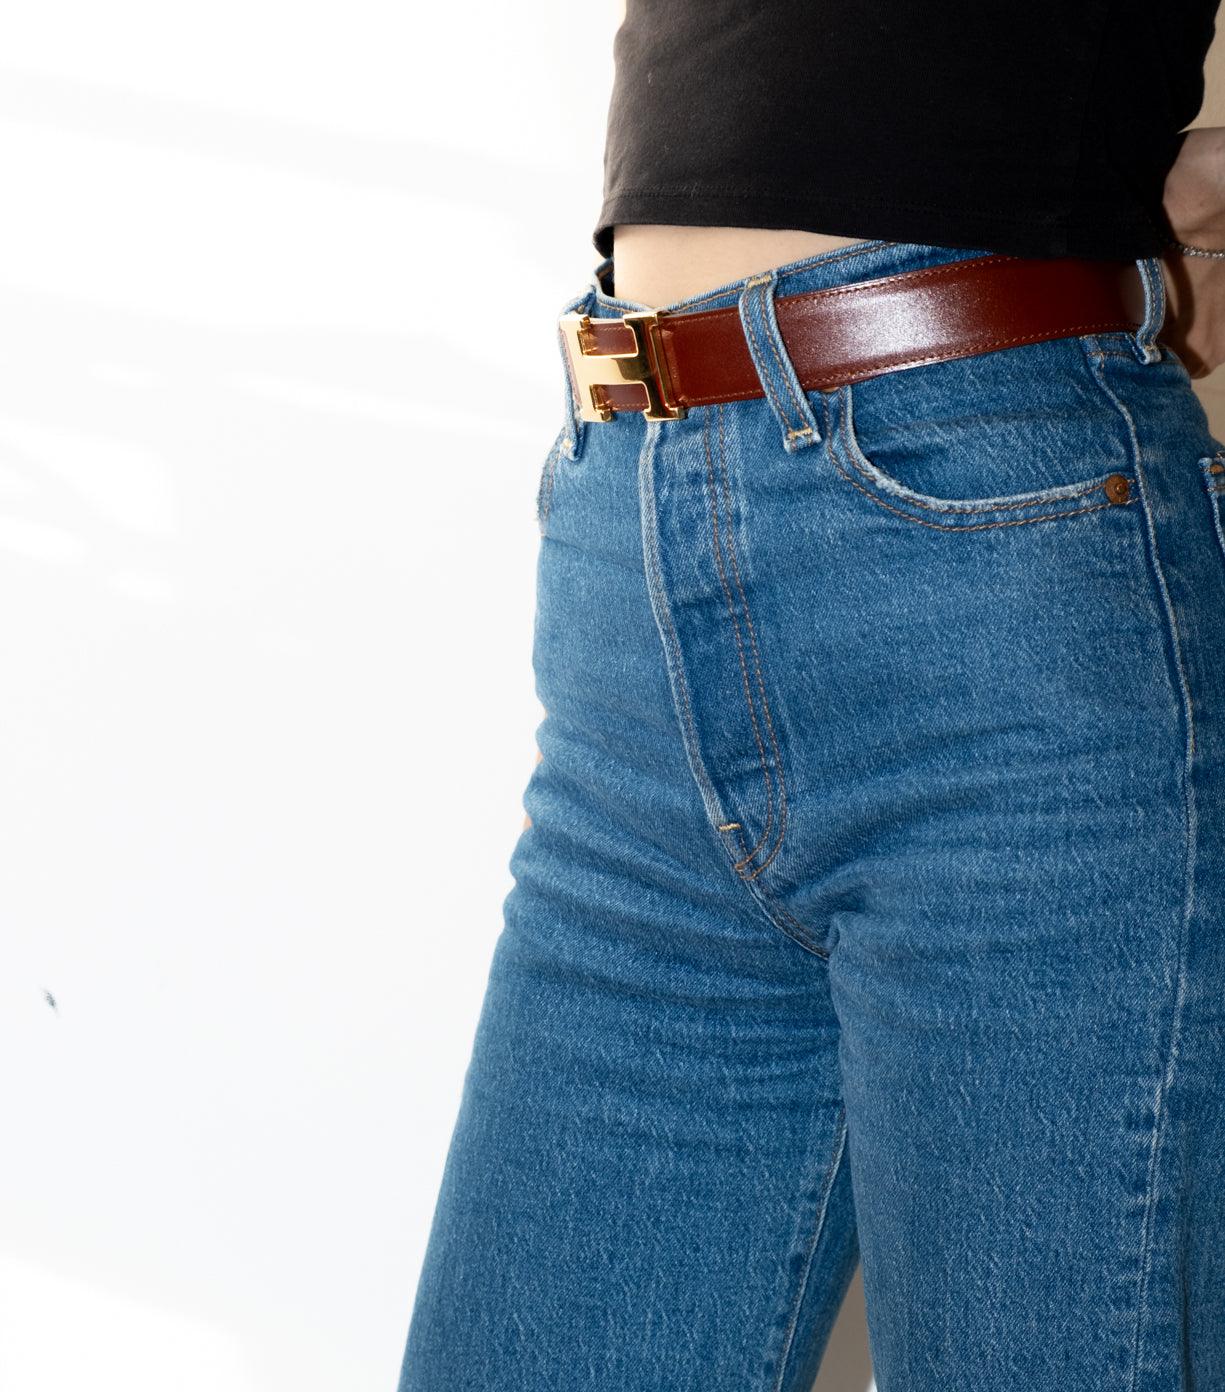 double Sided Leather Belt Gold